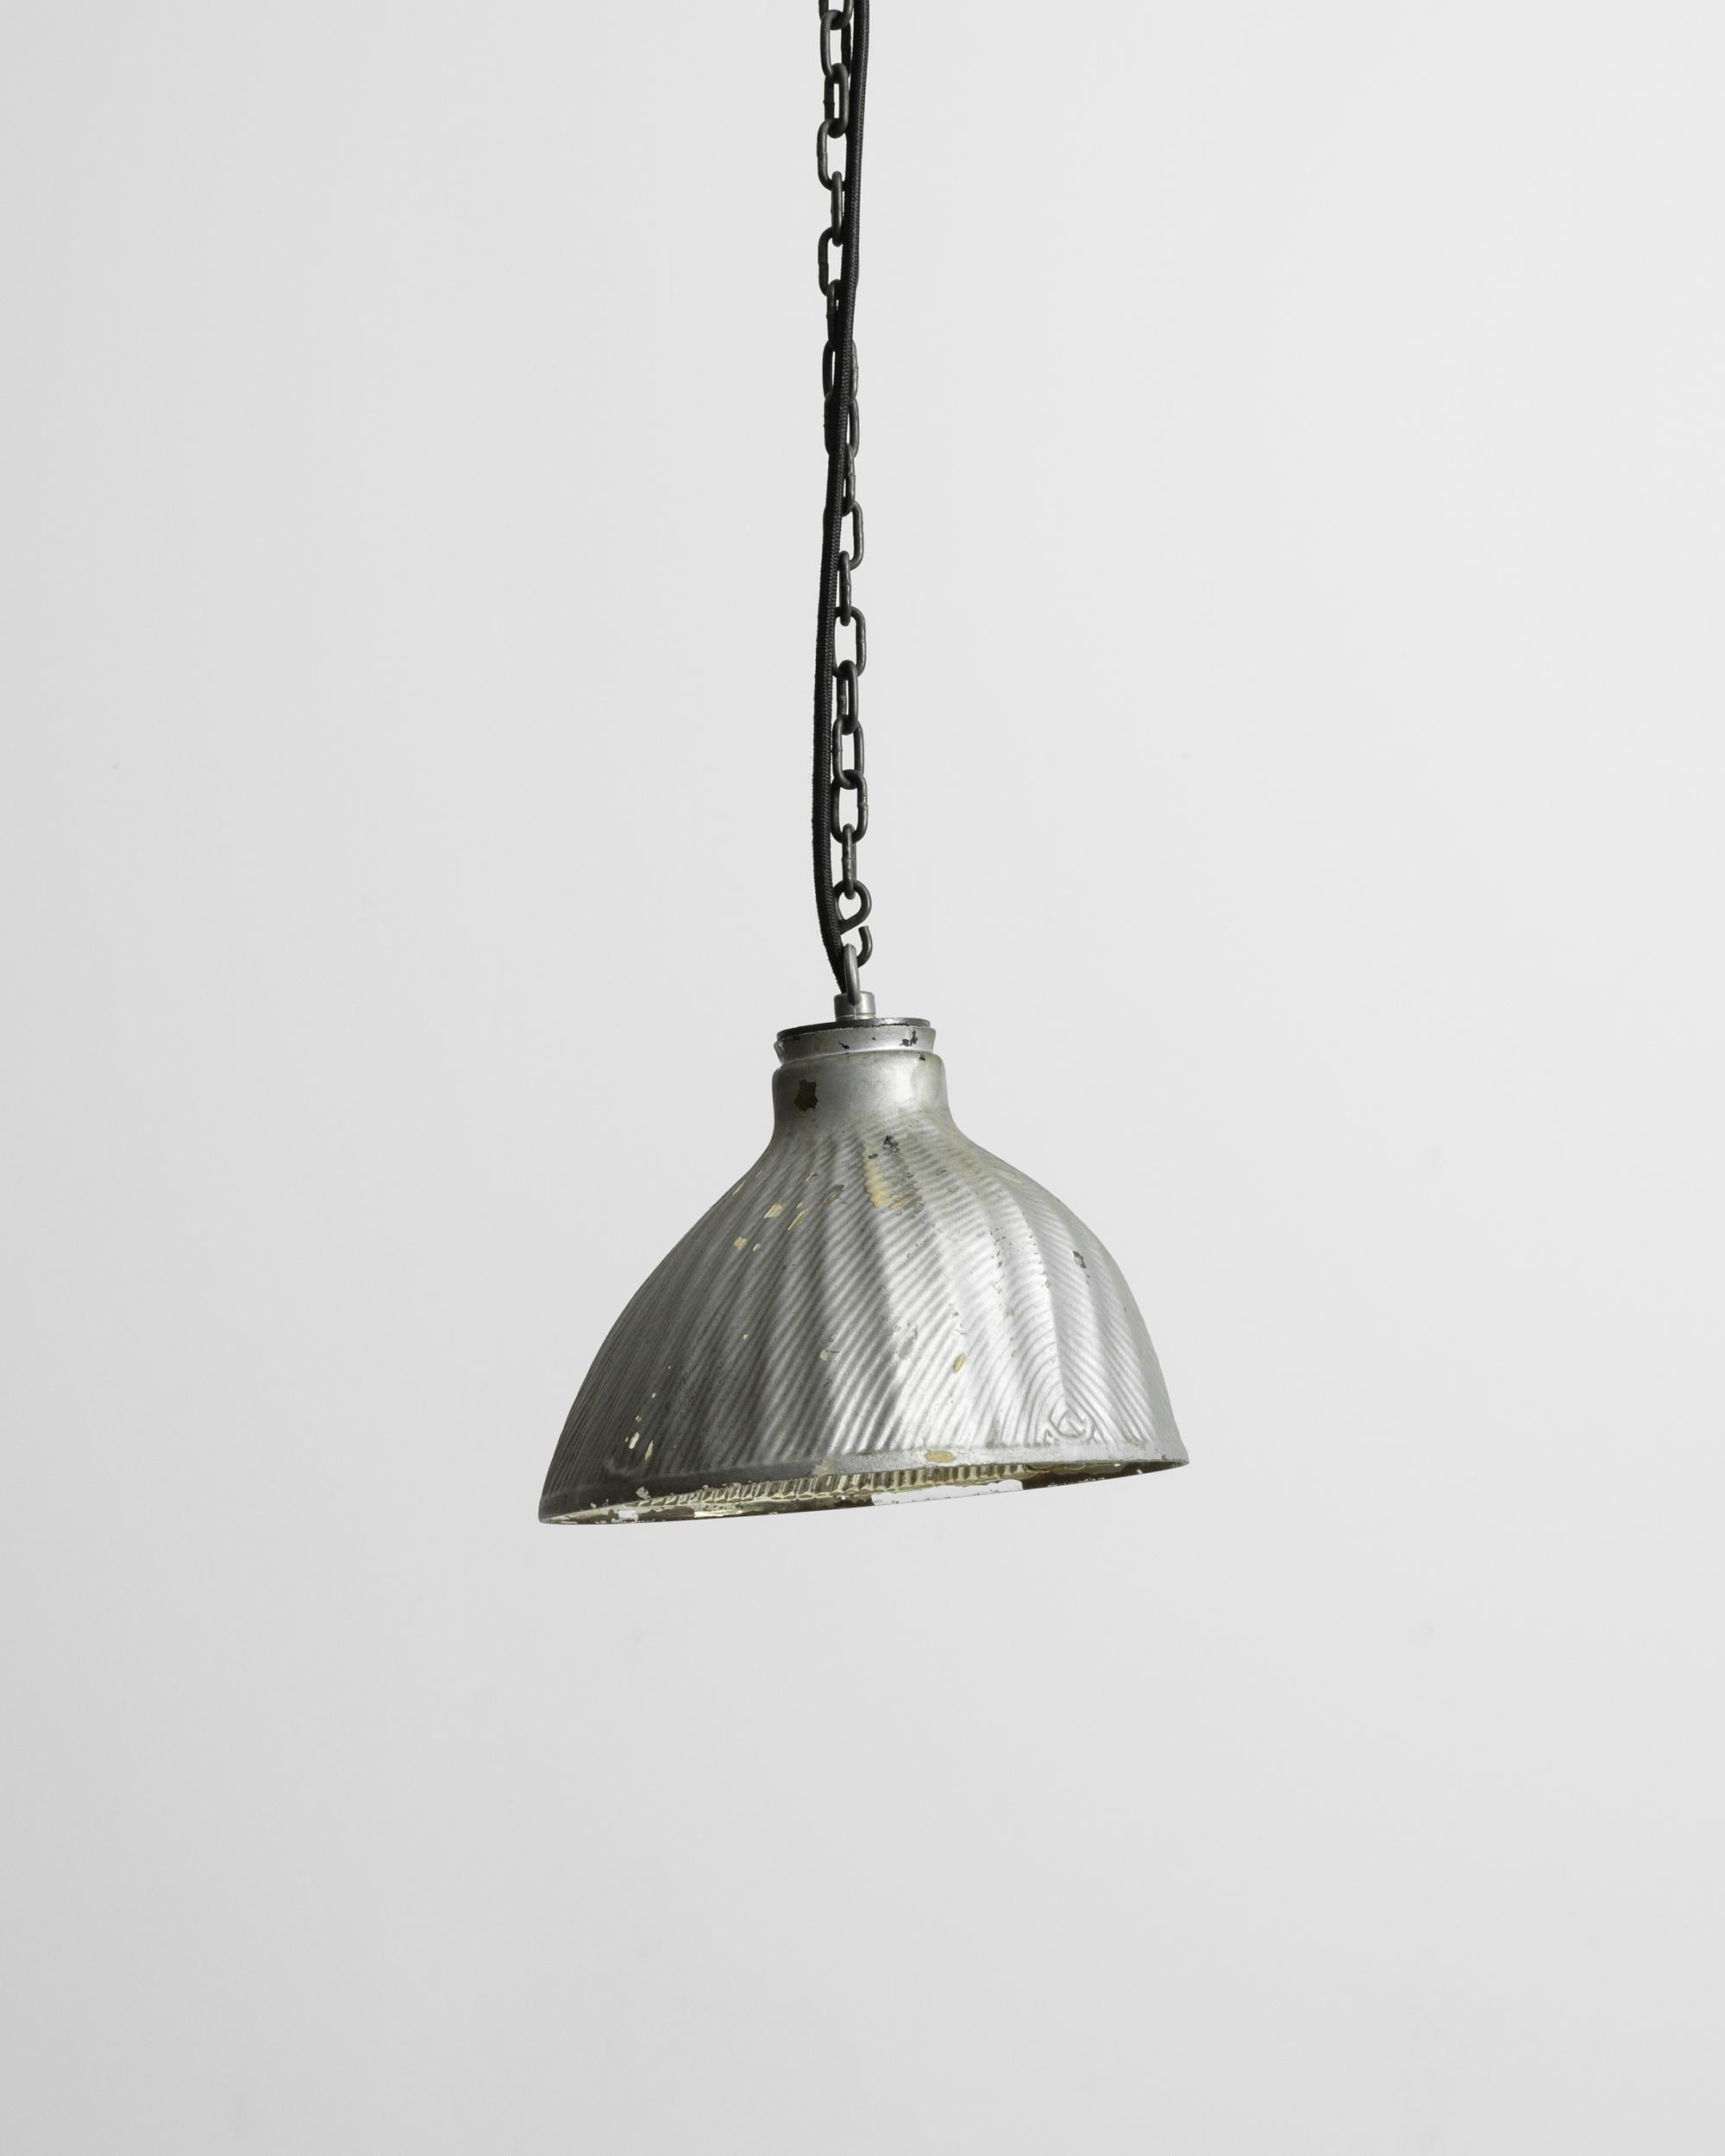 This turn of the century pendant lamp offers a unique industrial accent. The asymmetrical shape and subtle fluting of the shade create a streamlined yet organic design; the rippled texture of the surface evokes the ridges of a human fingerprint.